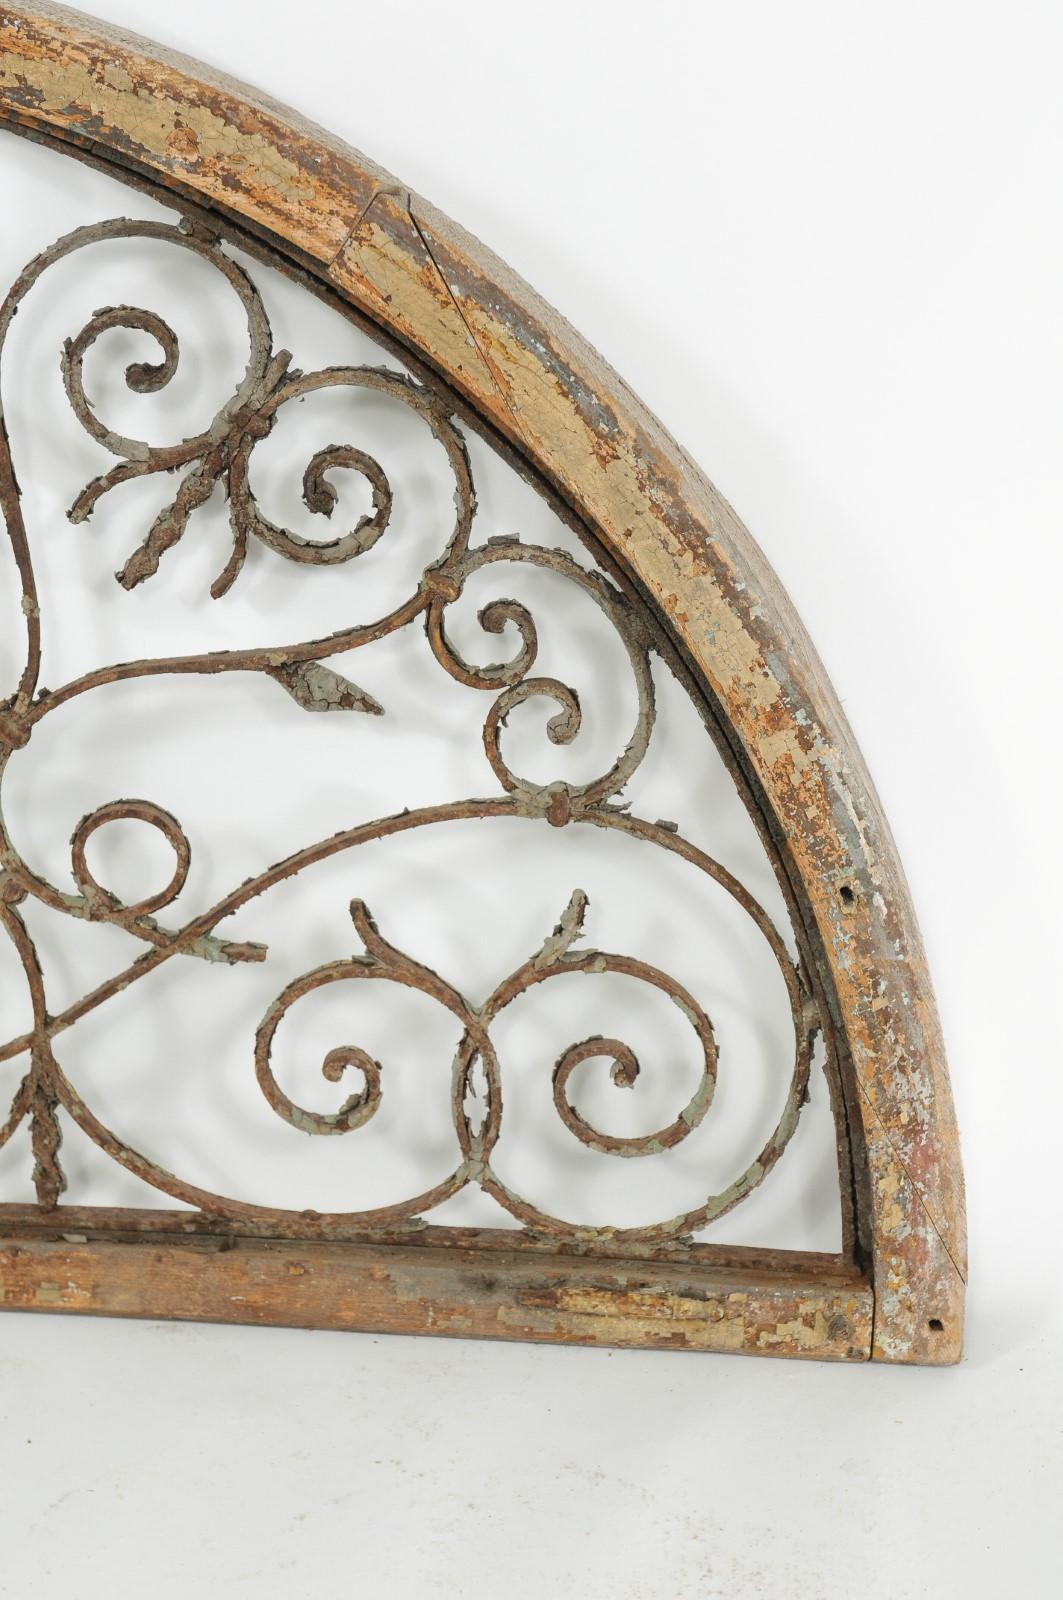 20th Century Continental Wrought Iron and Pine Demi-Lune Architectural Wall Panel, circa 1900